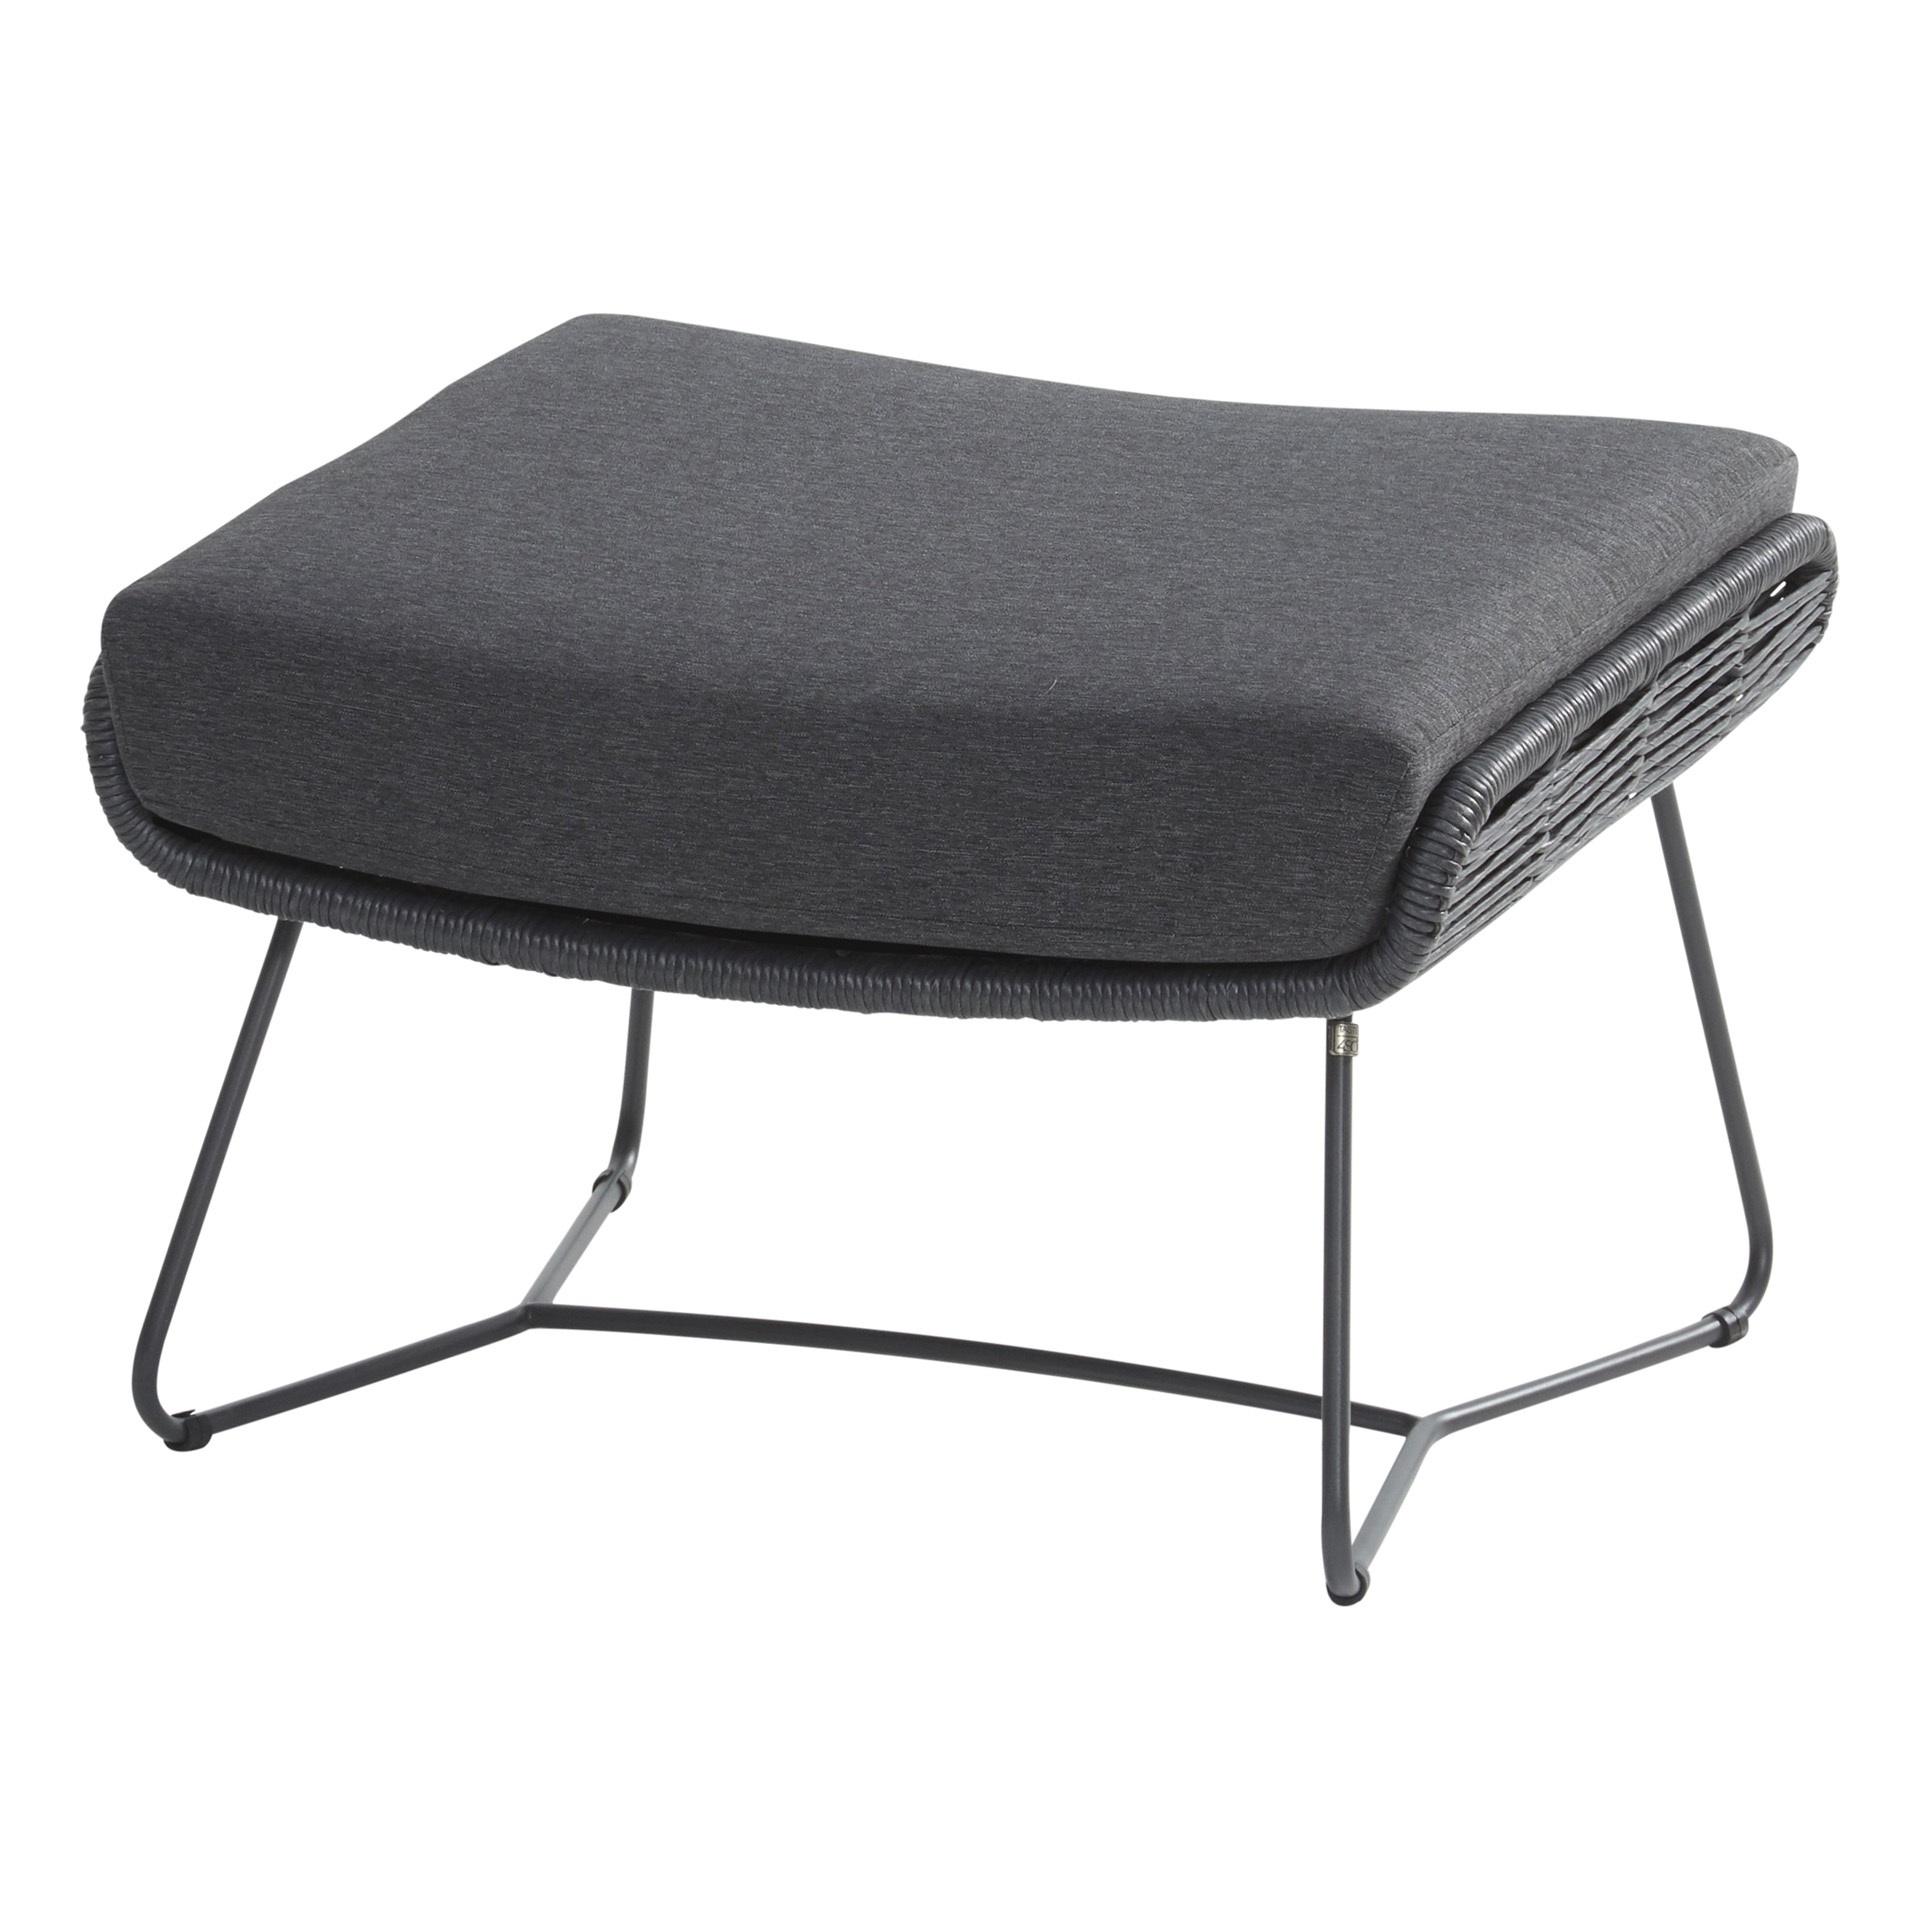 Belmond Footstool with cushion Antracite 